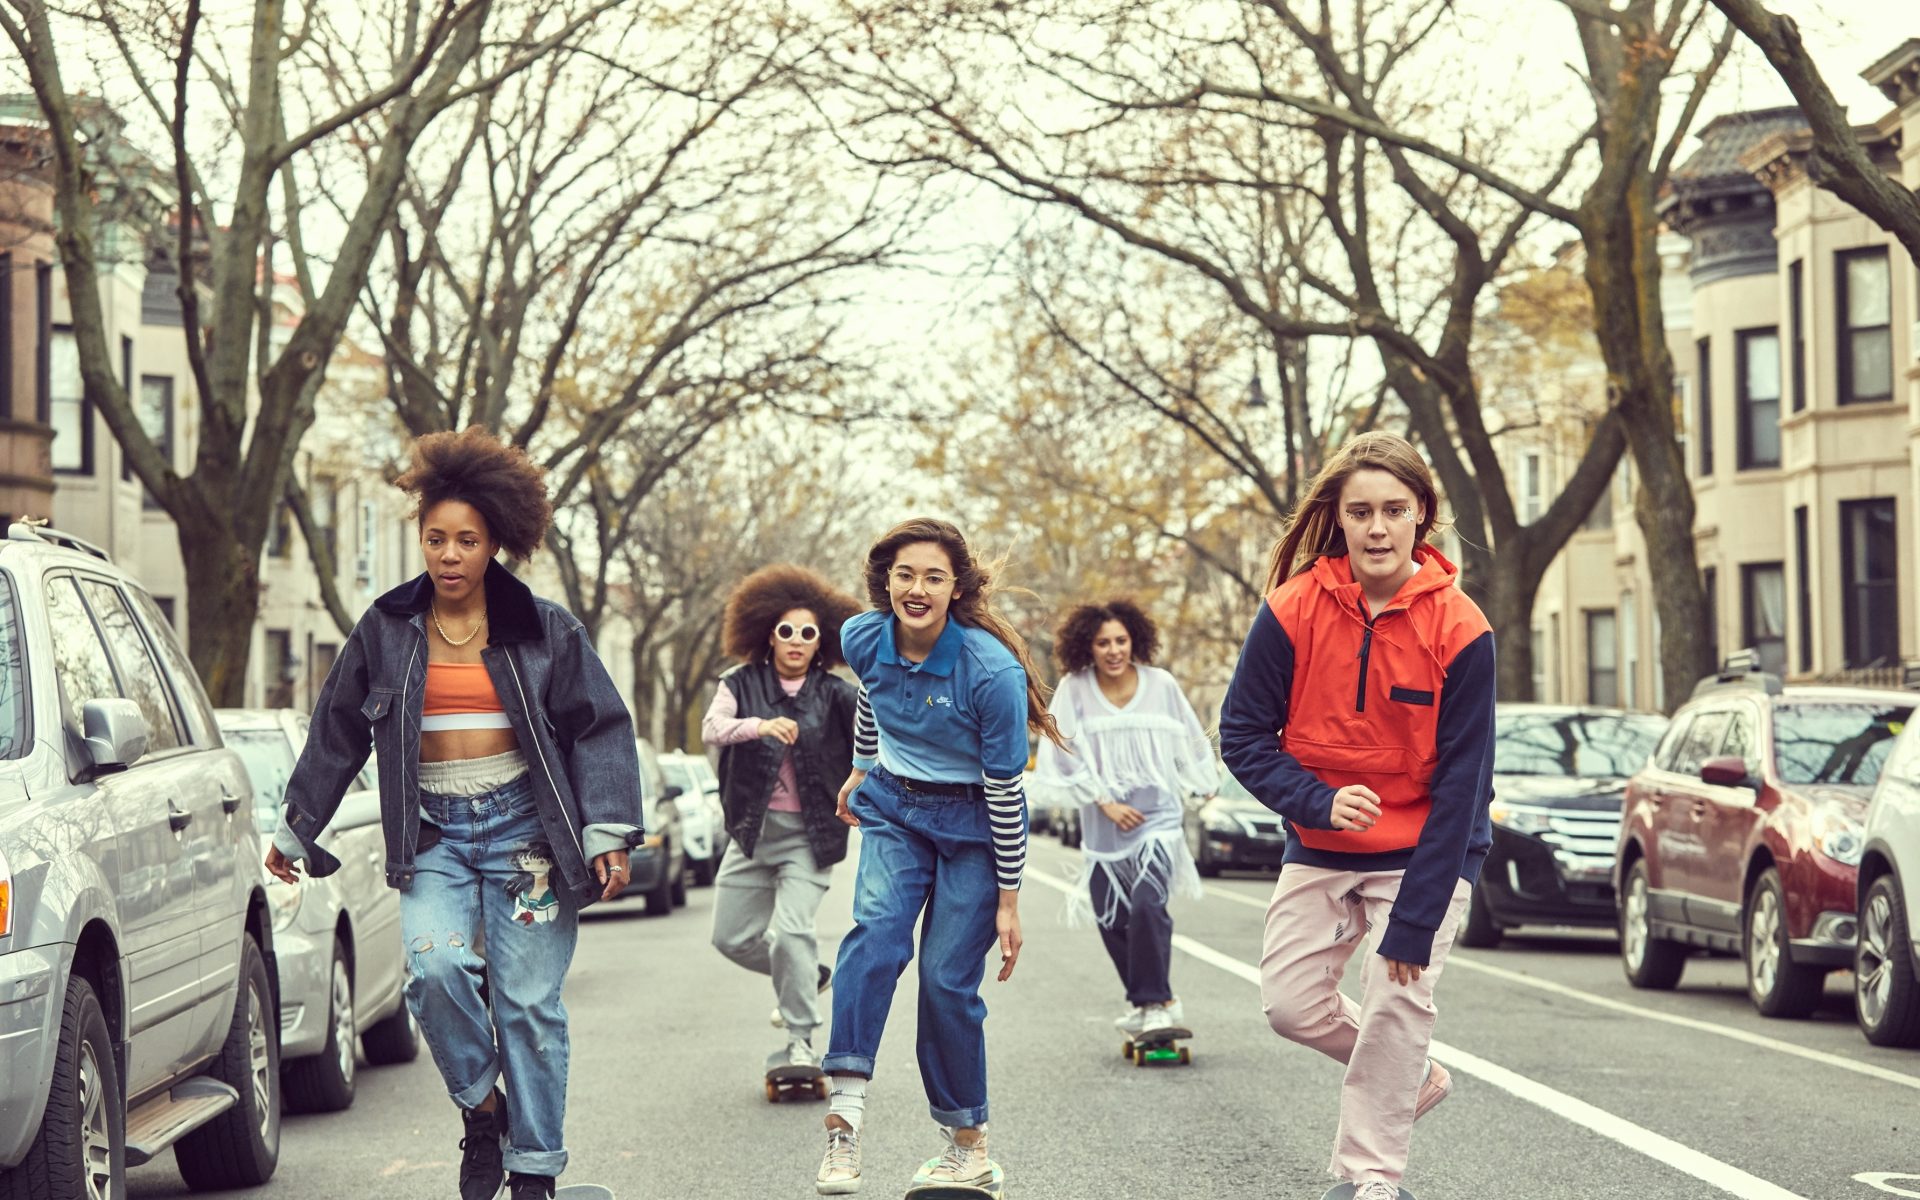 Watch 'Skate Kitchen' trailer about NYC's young sk8r grrrls